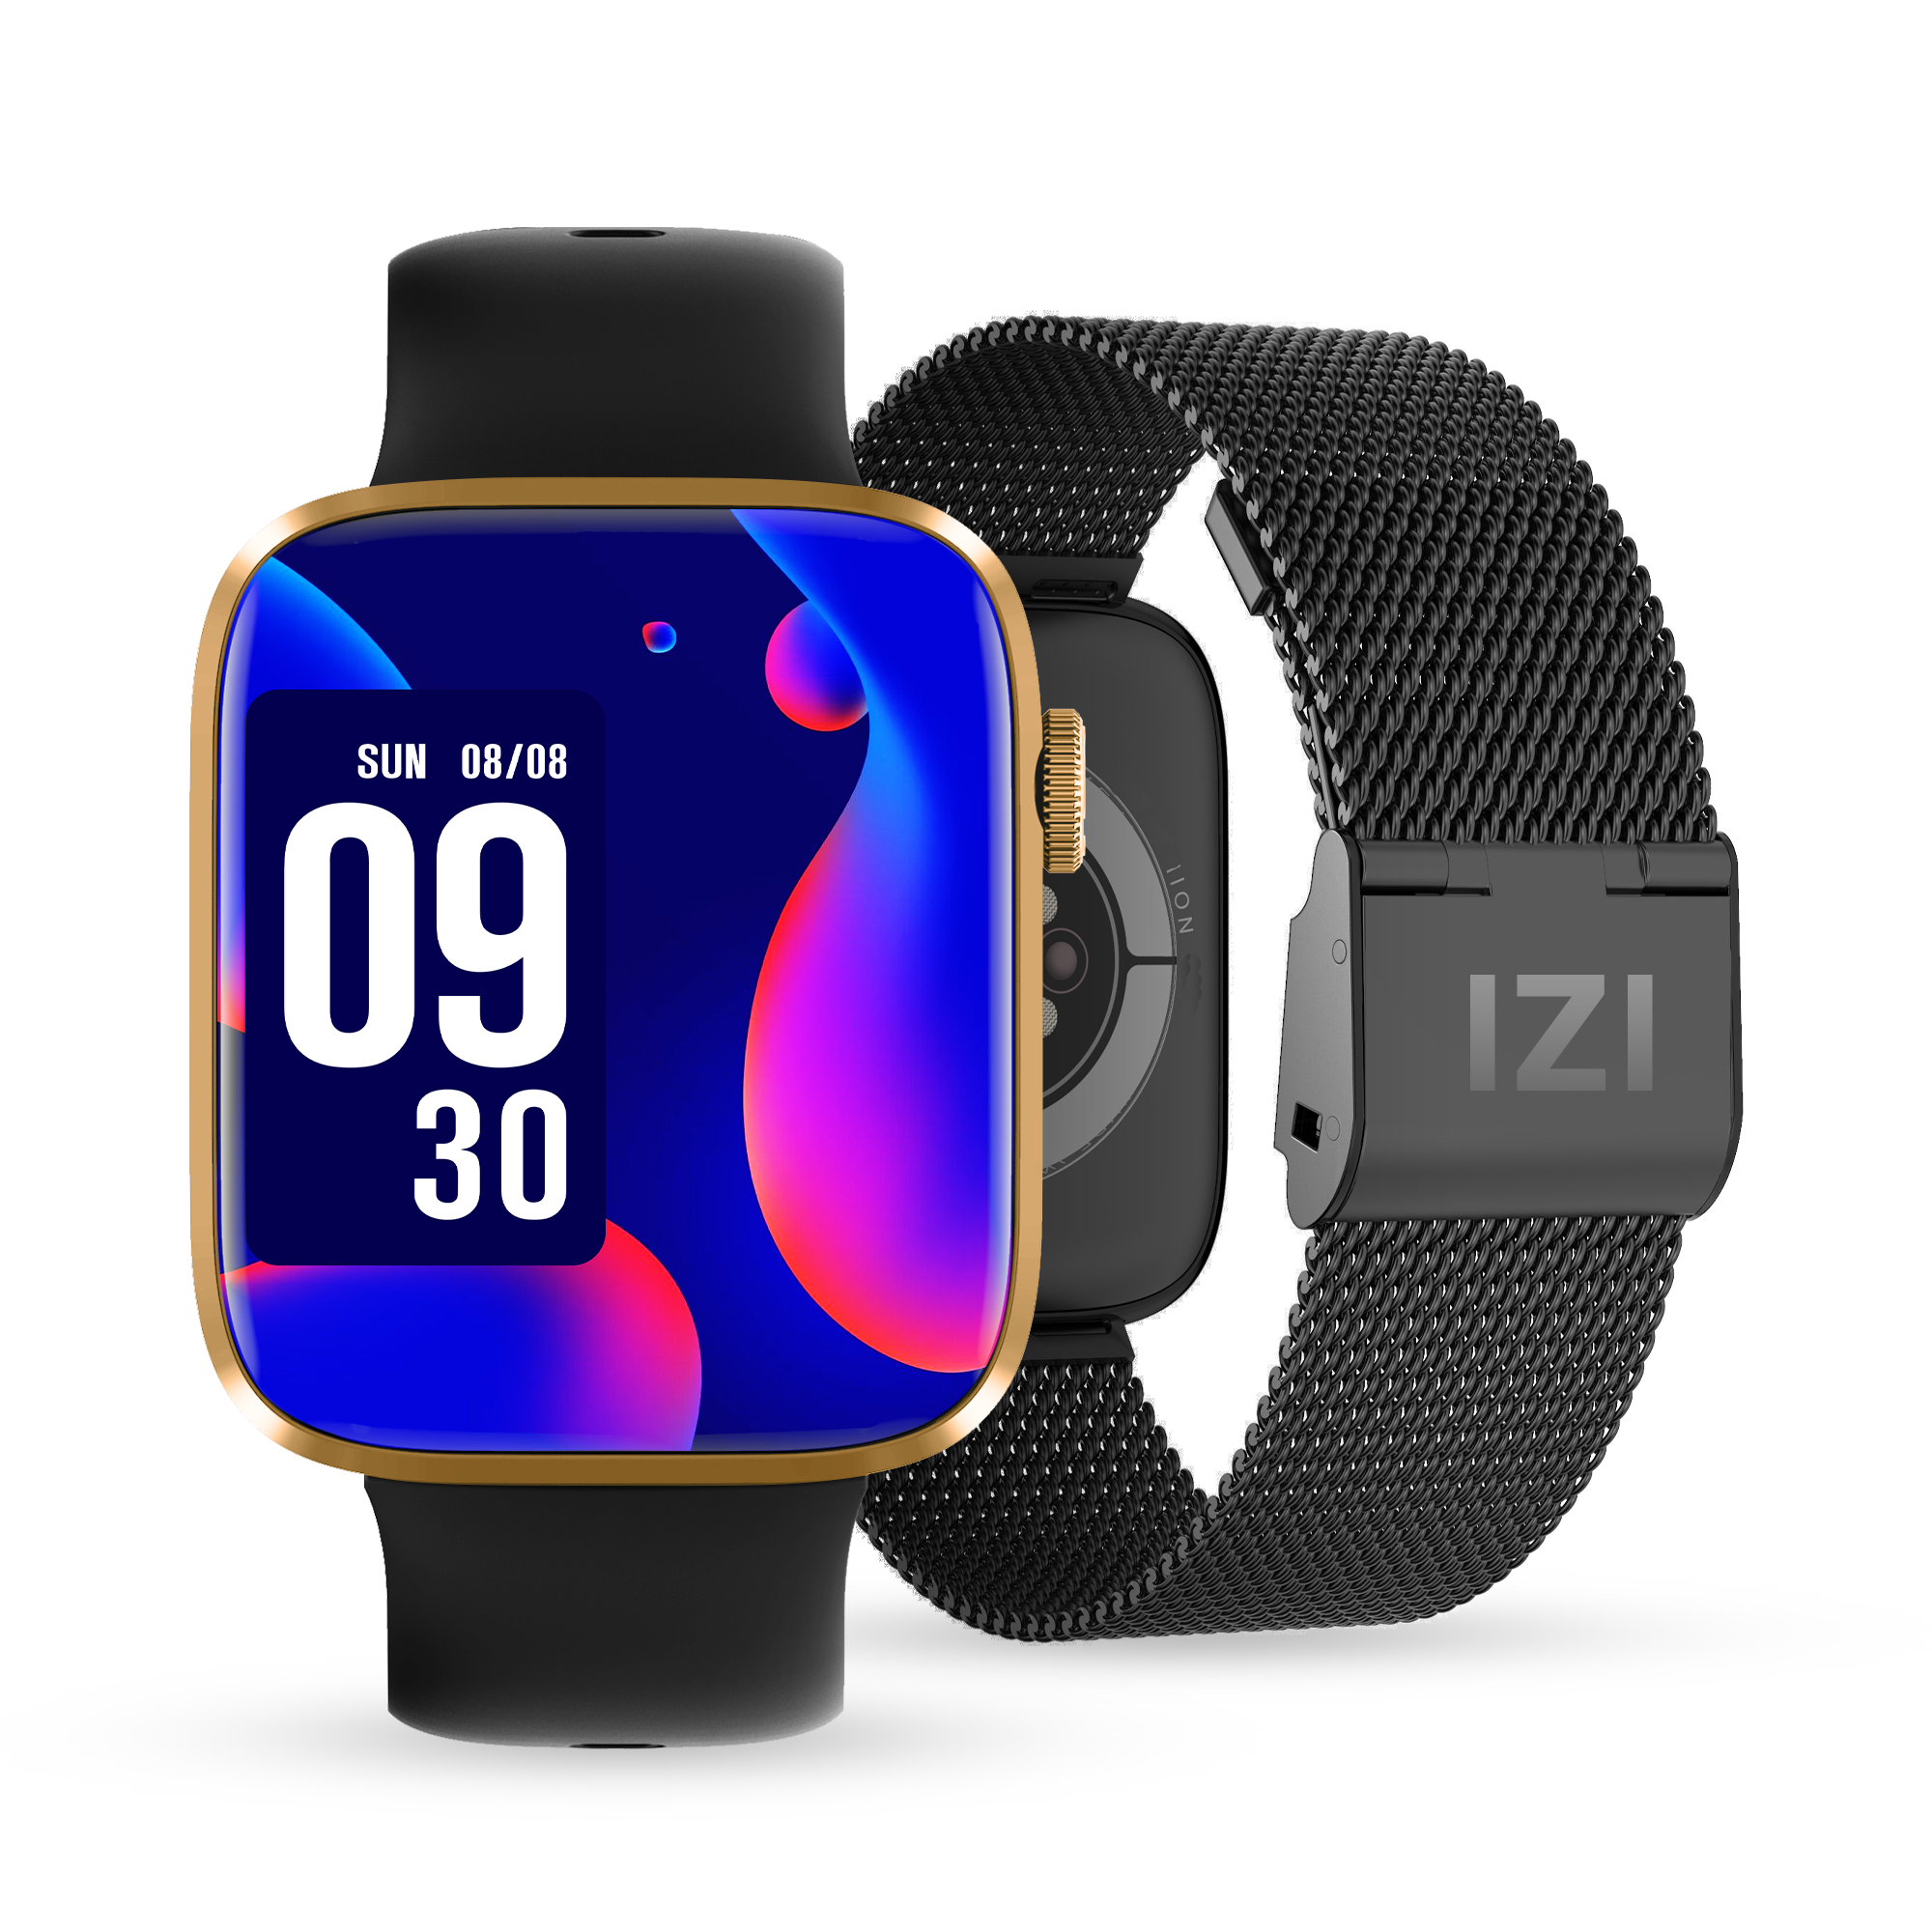 IZI Smart Pro 1.92" Retina Display Smart Watch for Women, Bluetooth Calling, Menstrual Tracking, Health Activity Tracker, AI Voice Assistant, 500+ WatchFaces, 5 Days Battery, 2 Premium Straps